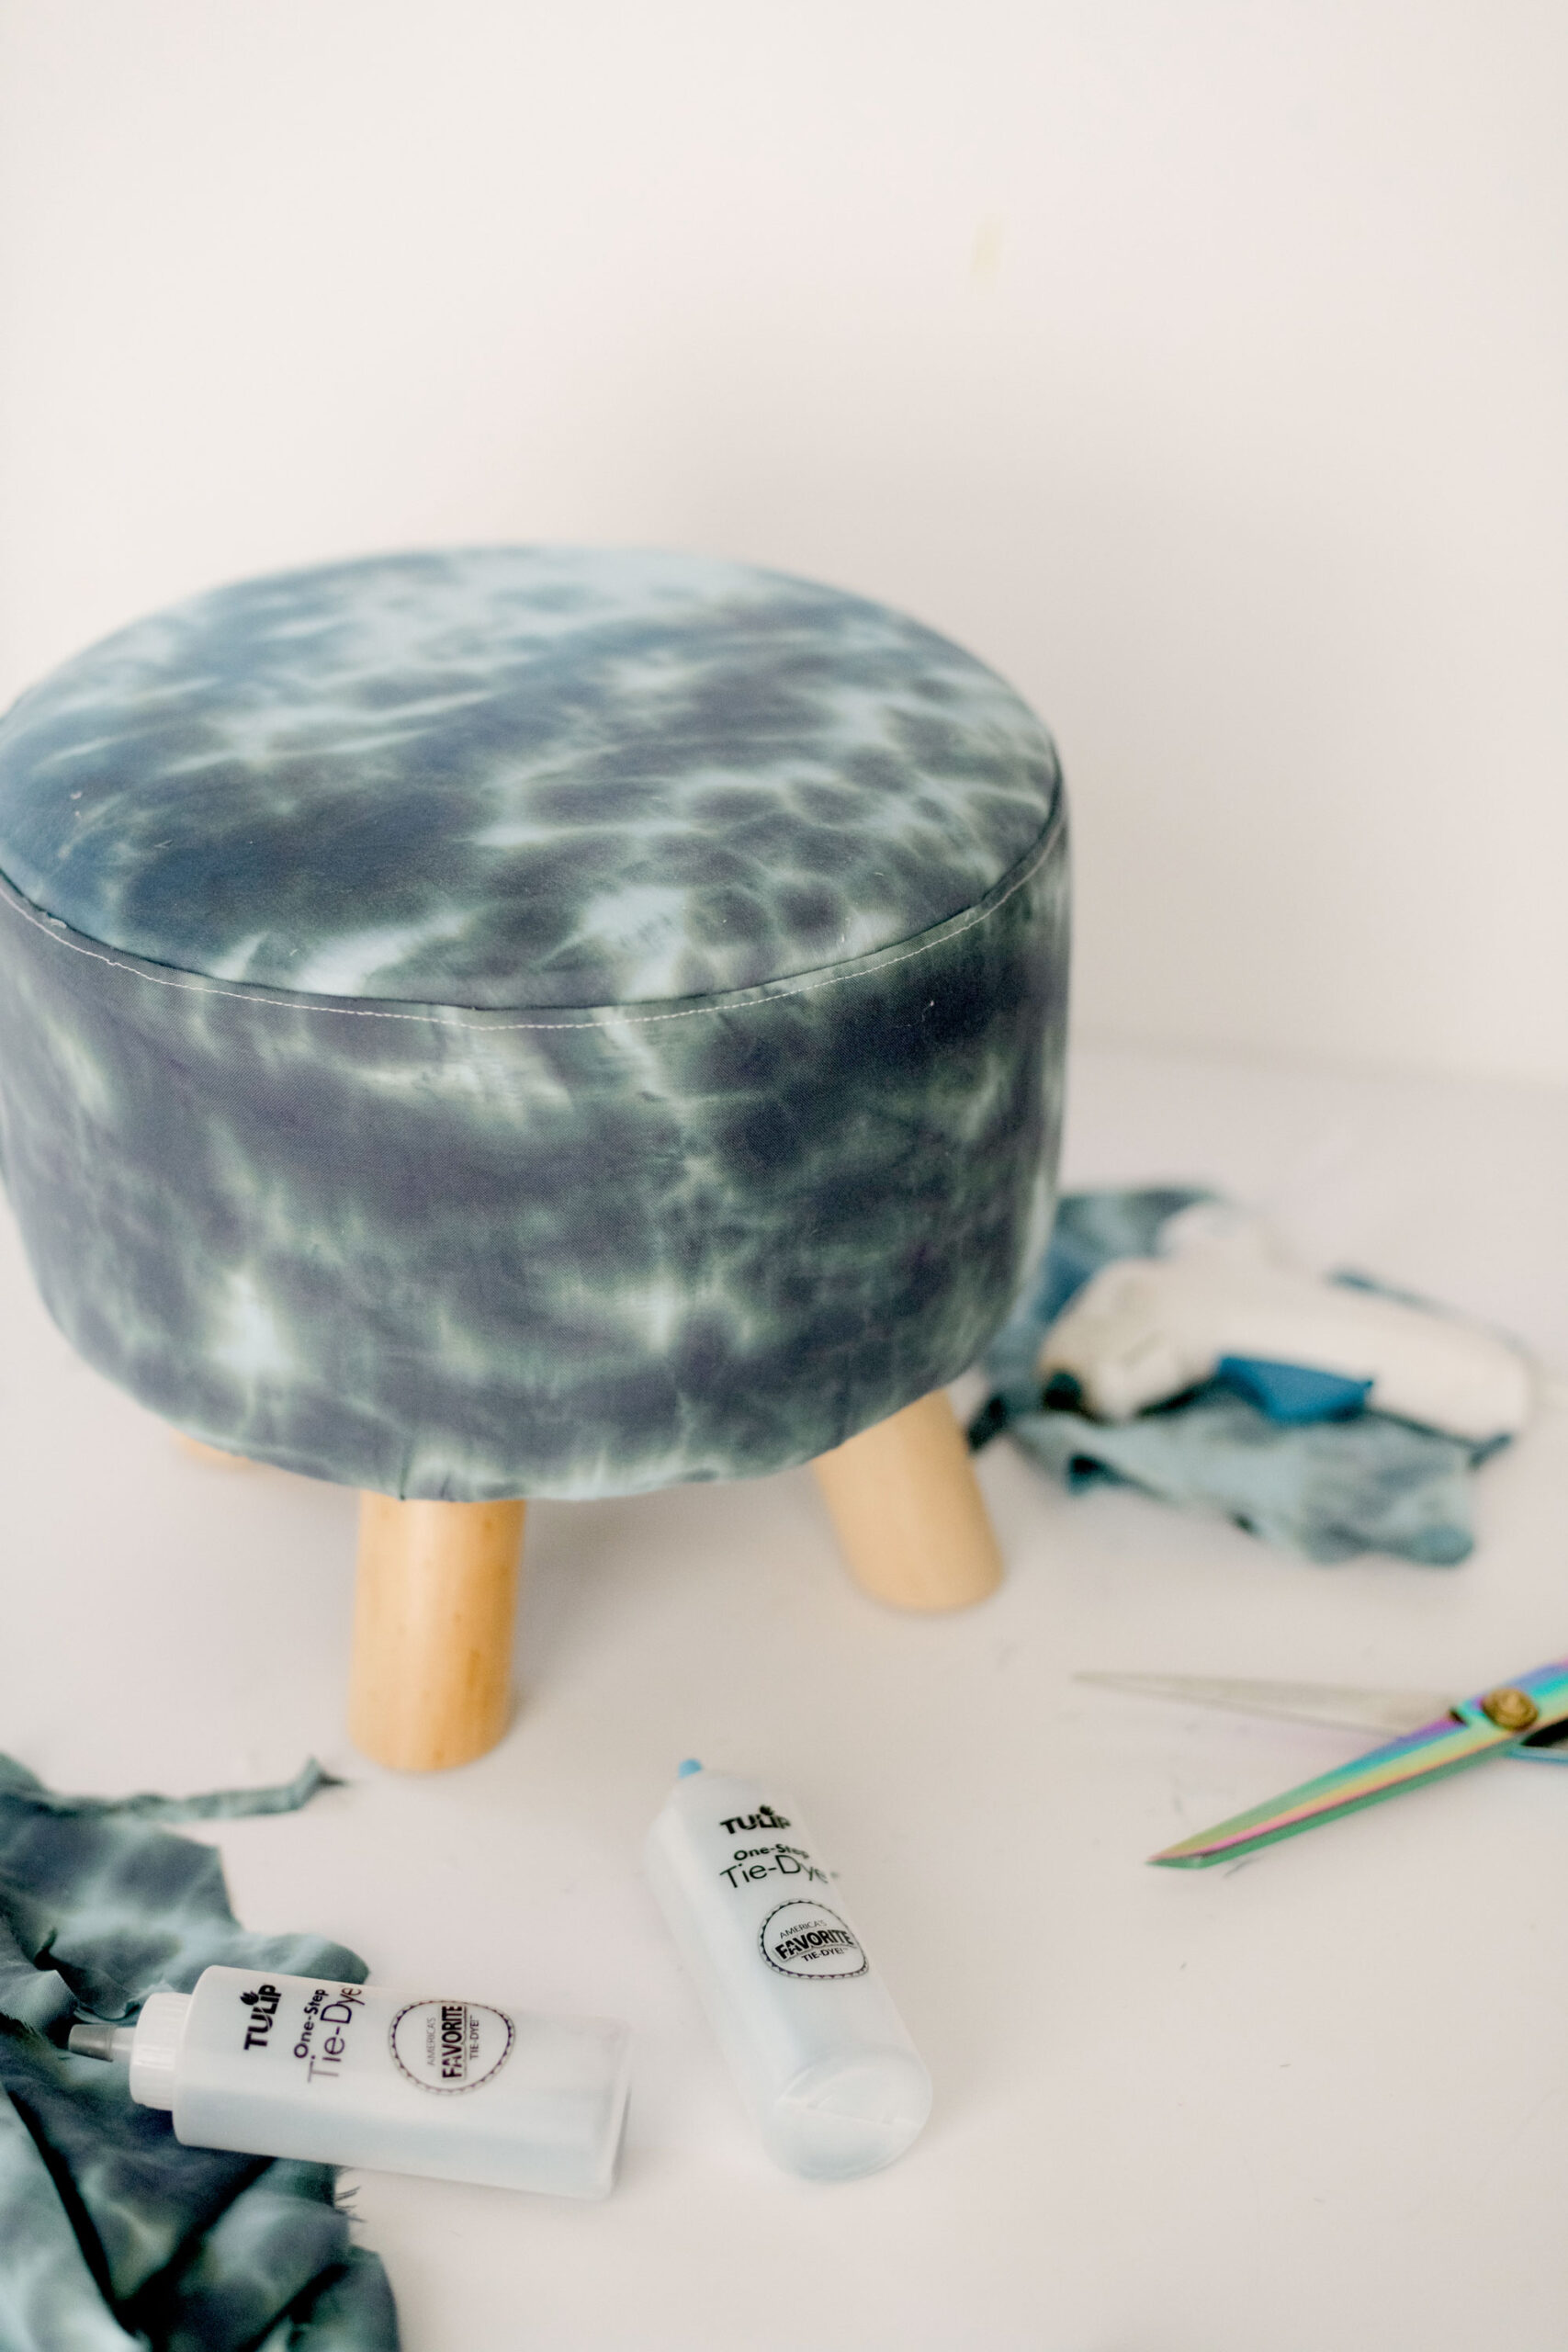 Shibori inspired footstool recovering, how to recover a footstool, shibori inspired tie dye DIY, Shibori inspired dye, how to shibori dye a footstool